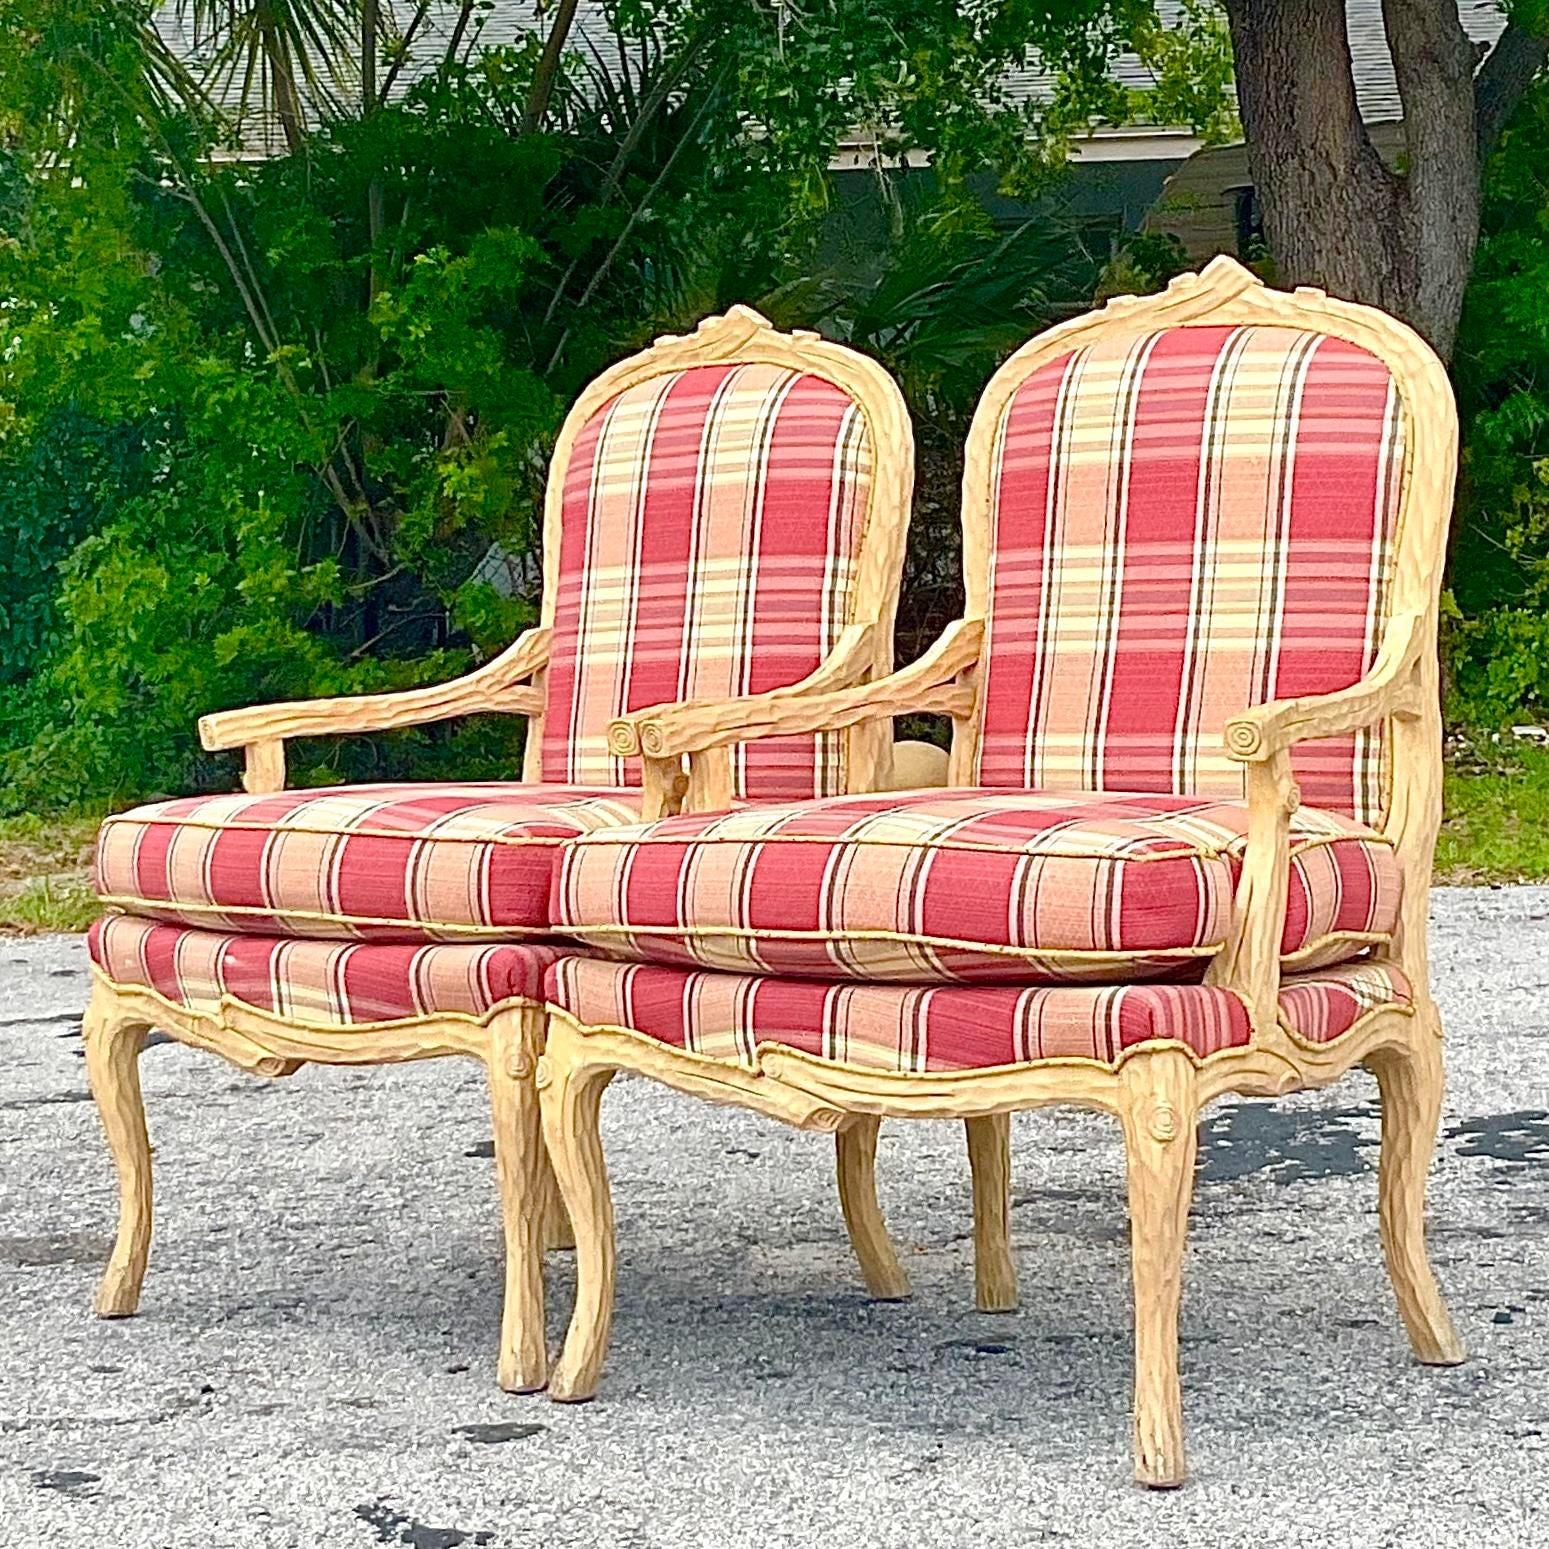 Add a touch of sophisticated charm to your décor with this pair of Vintage Regency Carved Faux Bois Bergere Chairs. These exquisite chairs blend American style with Regency elegance, featuring intricate faux bois carving and plush upholstery.